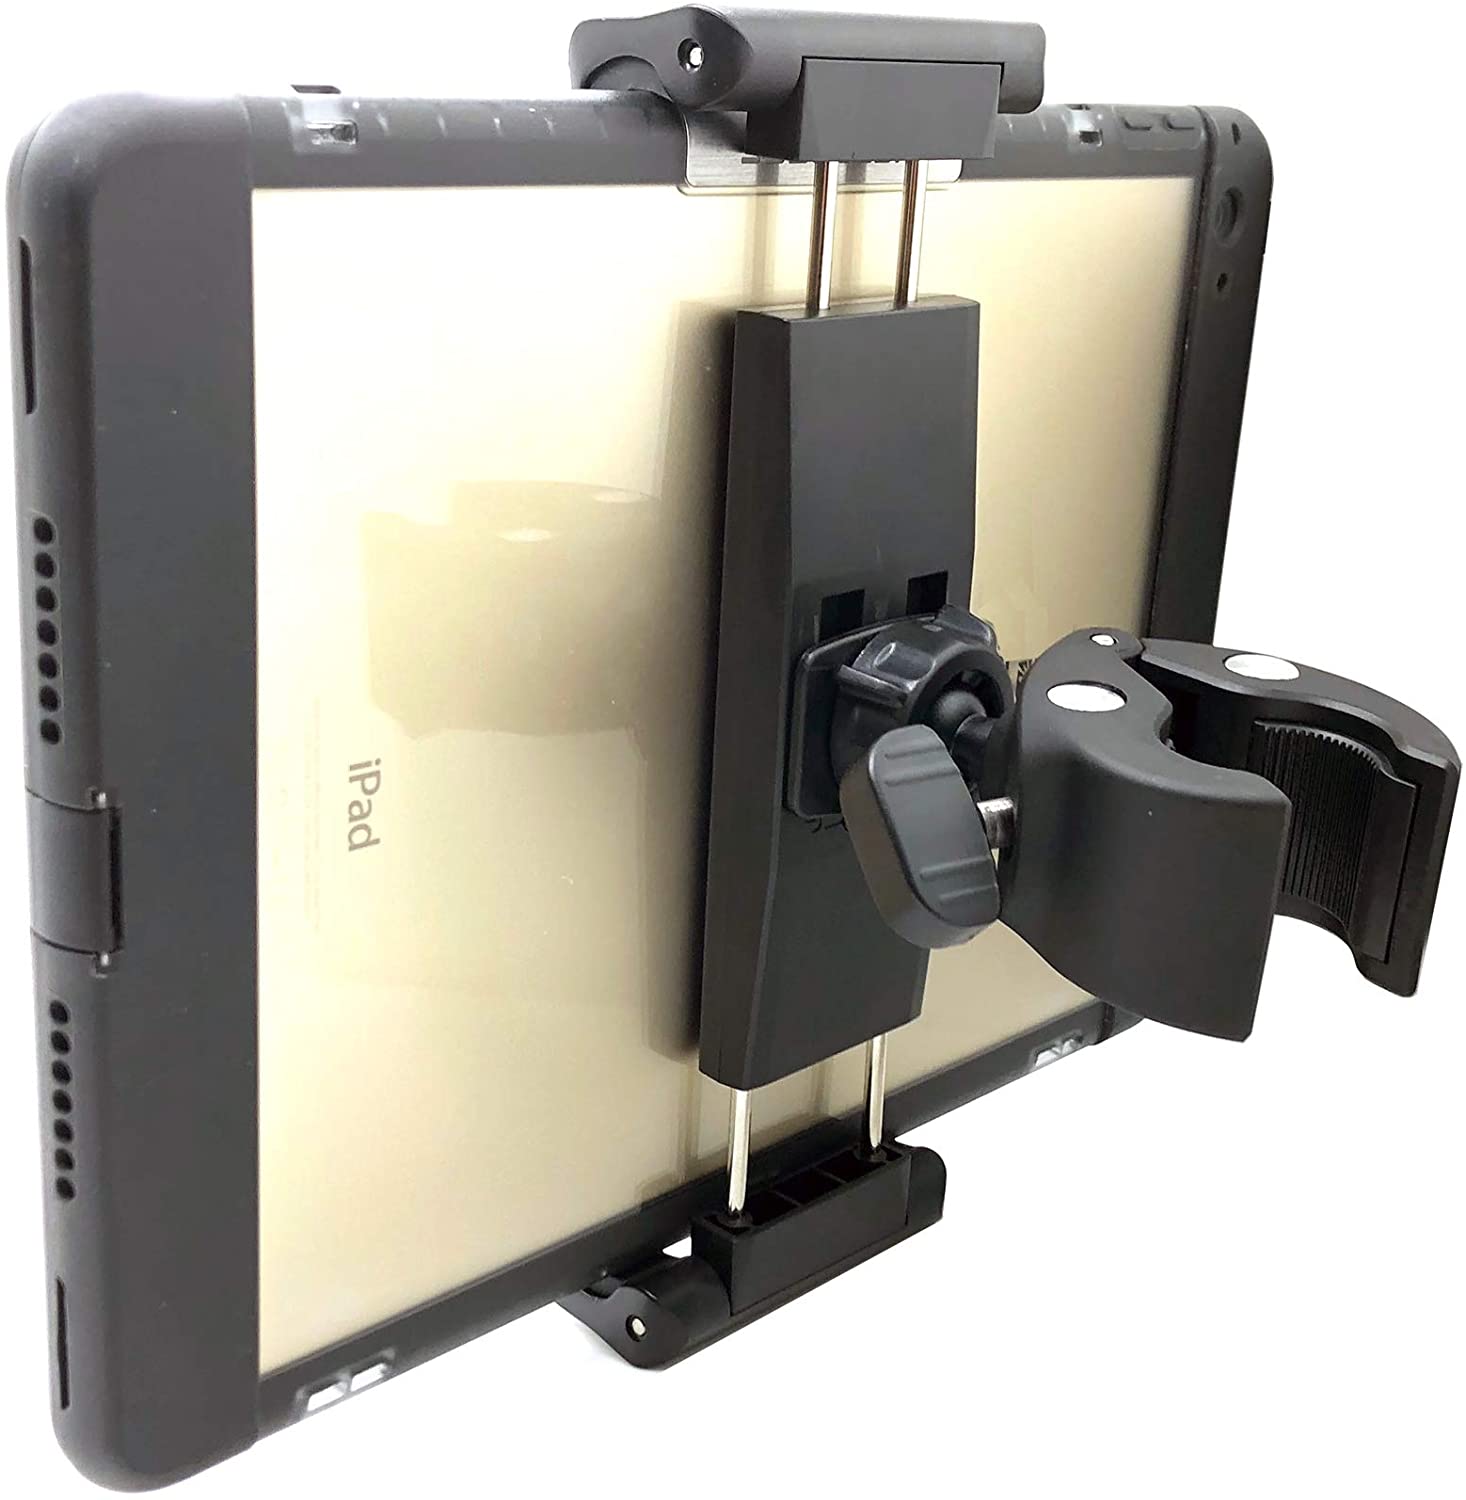 Lycan tablet device mount for boats